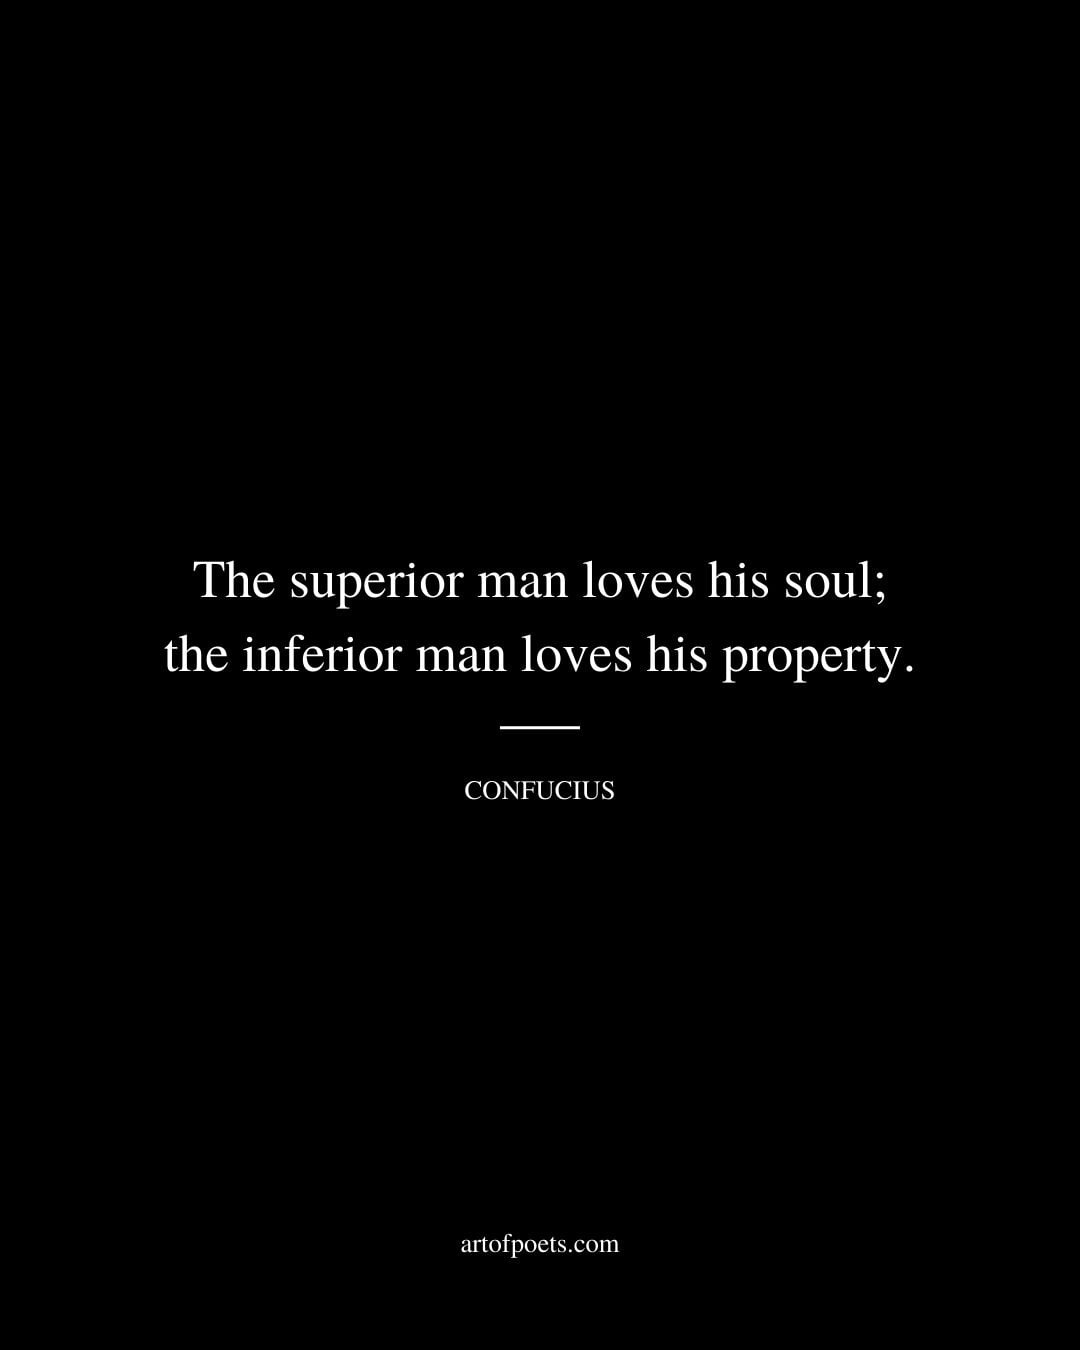 The superior man loves his soul the inferior man loves his property 1